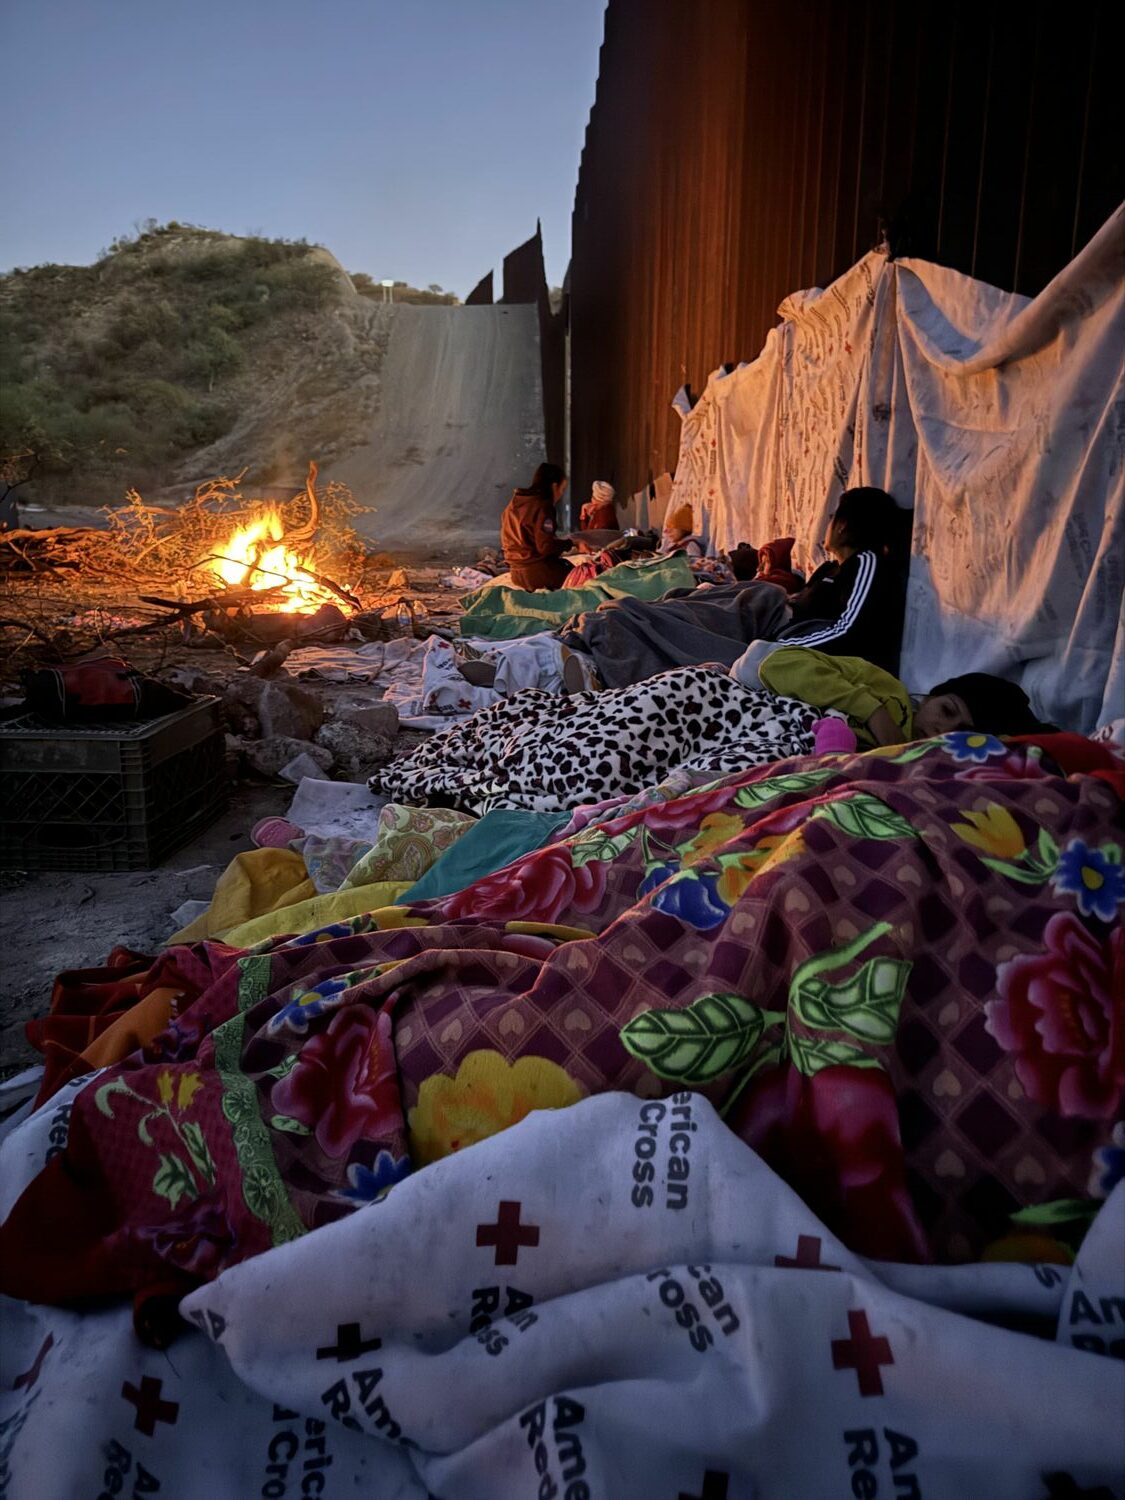 Asylum seekers camp out near the border wall outside Sasabe, Arizona. COURTESY ELISSA MCLEAN AND ANDY WINTER